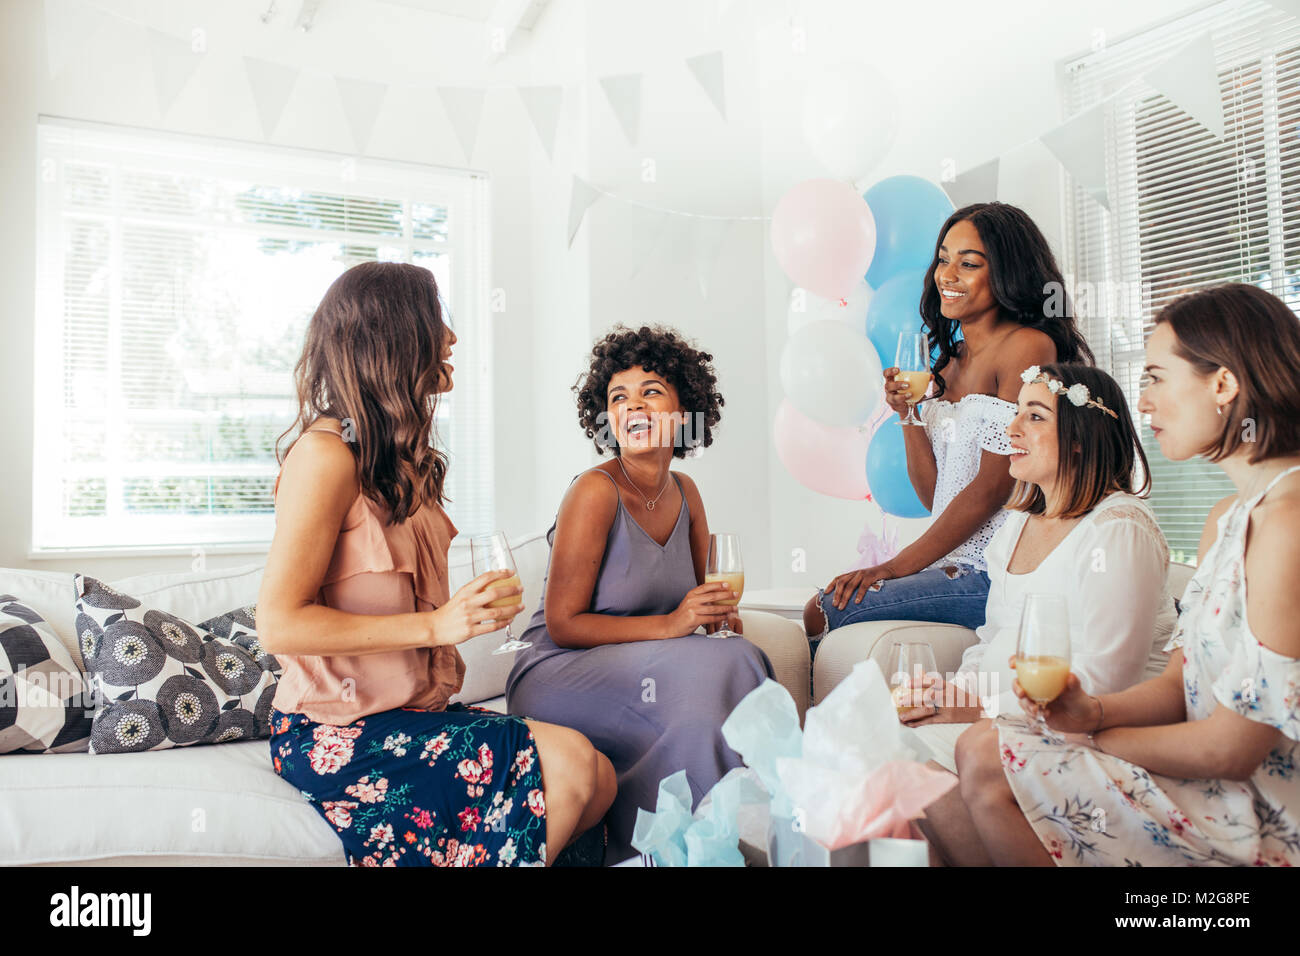 Multiracial women sitting together at a baby shower and laughing. Female friends having fun at baby shower. Stock Photo